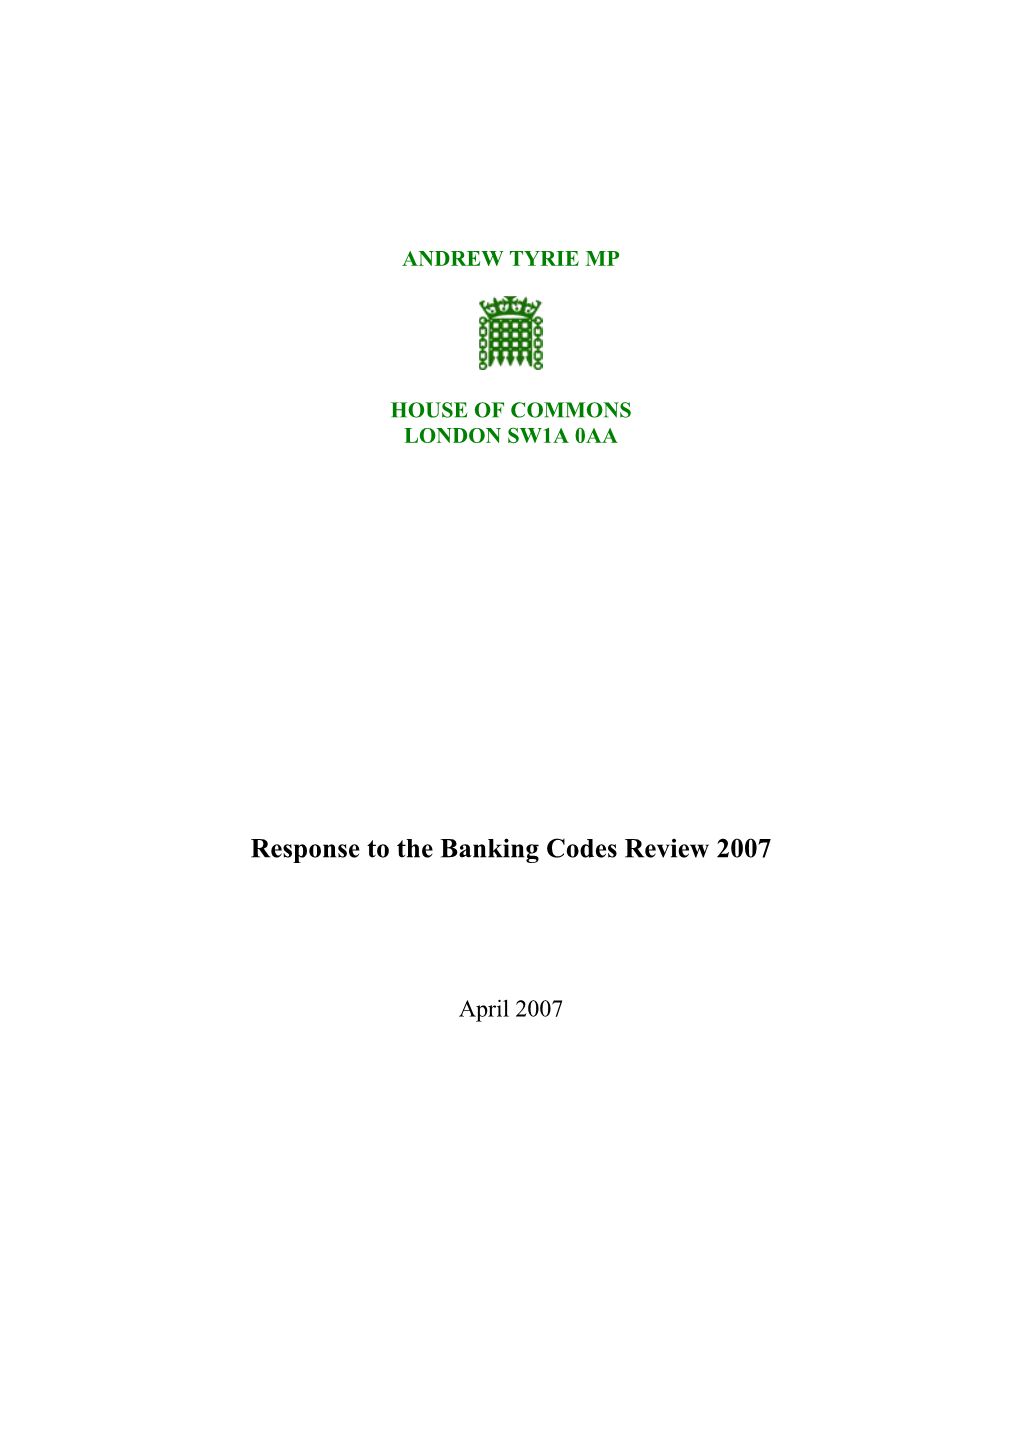 Response to the Banking Codes Review 2007